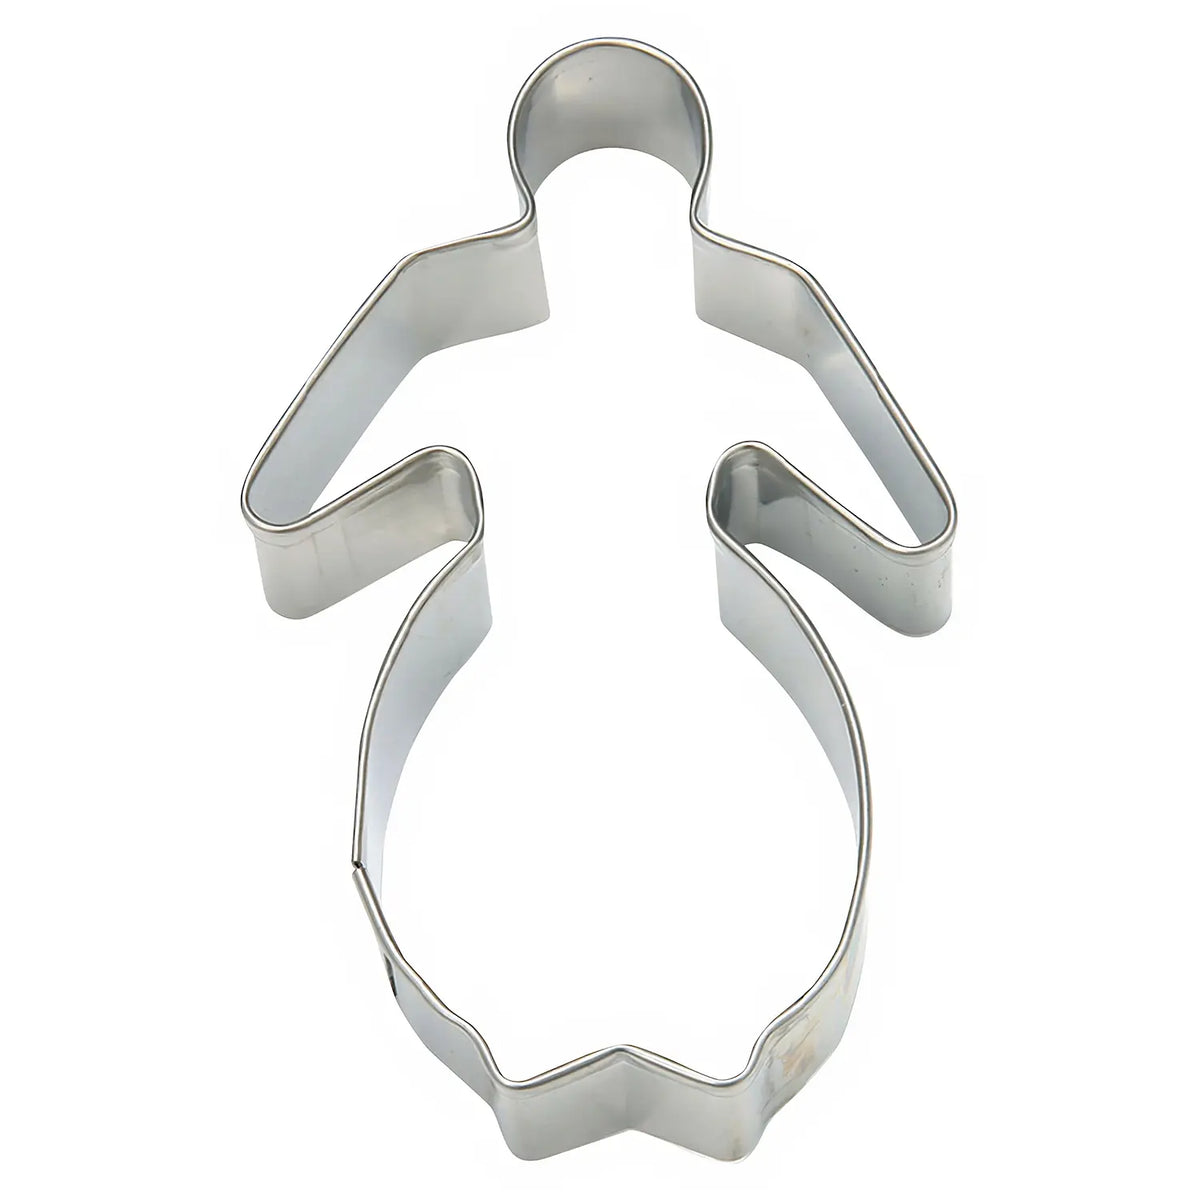 TIGERCROWN Cake Land Stainless Steel Cookie Cutter Gingerbread Woman